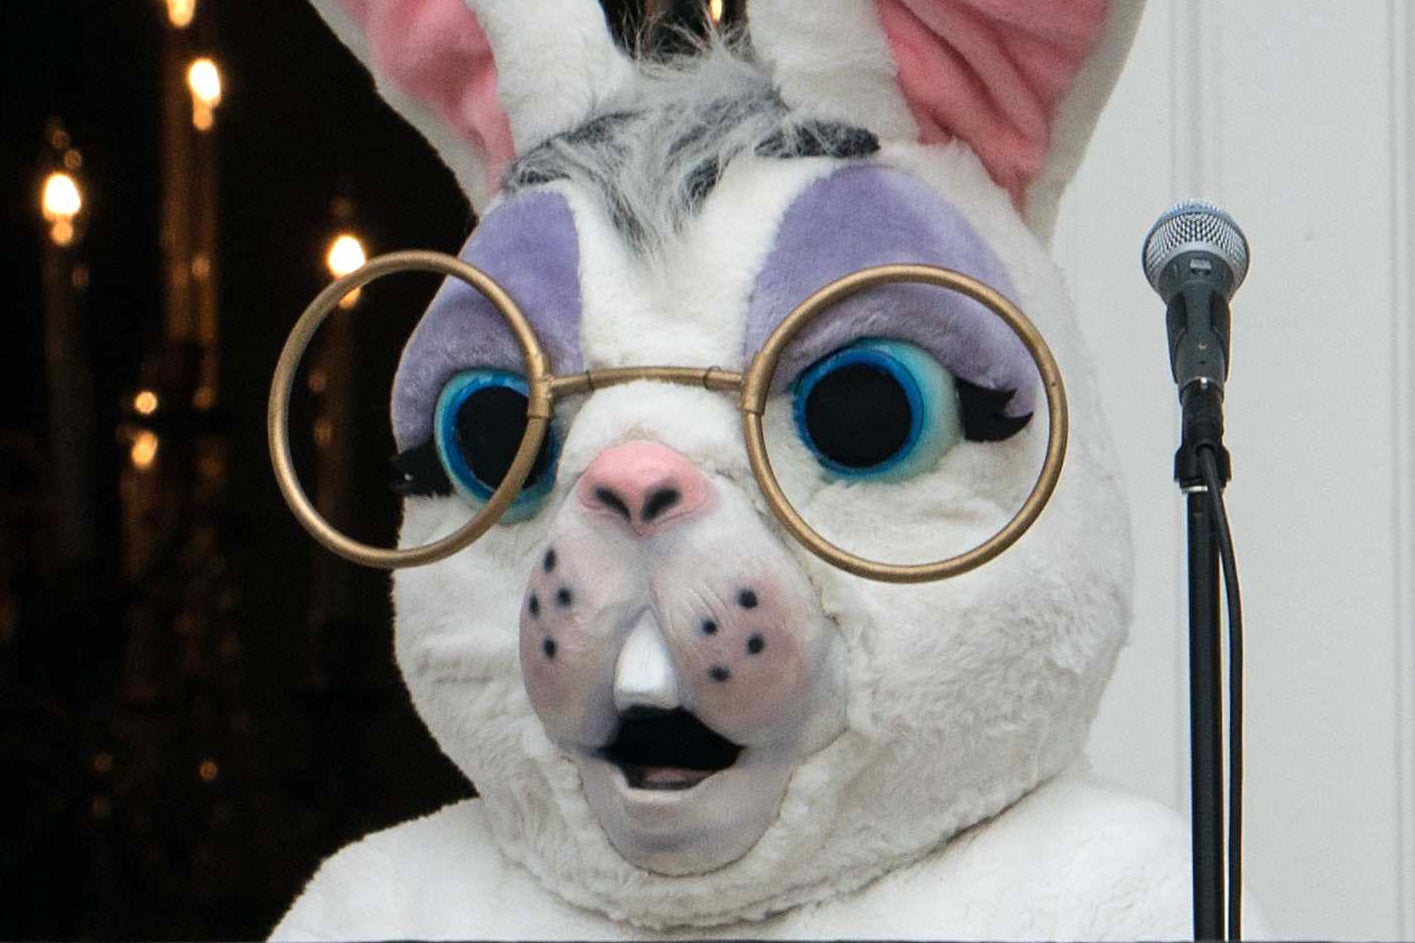 Sean Spicer in an Easter bunny costume.